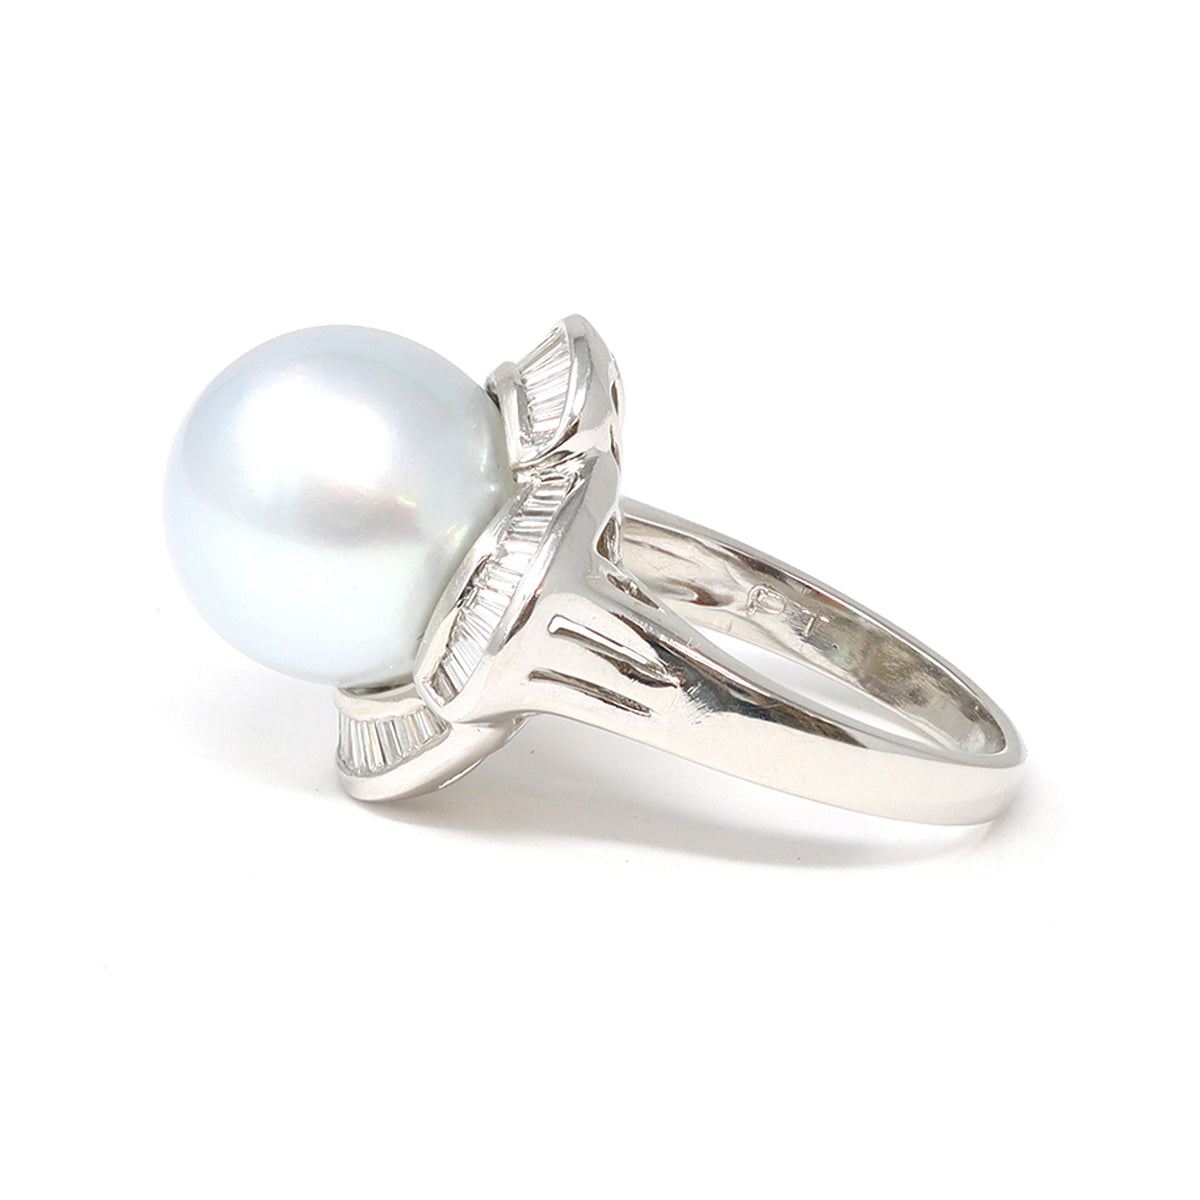 Ballerina South Sea Pearl and Diamond Cocktail Ring in Platinum, Circa 1980 side view